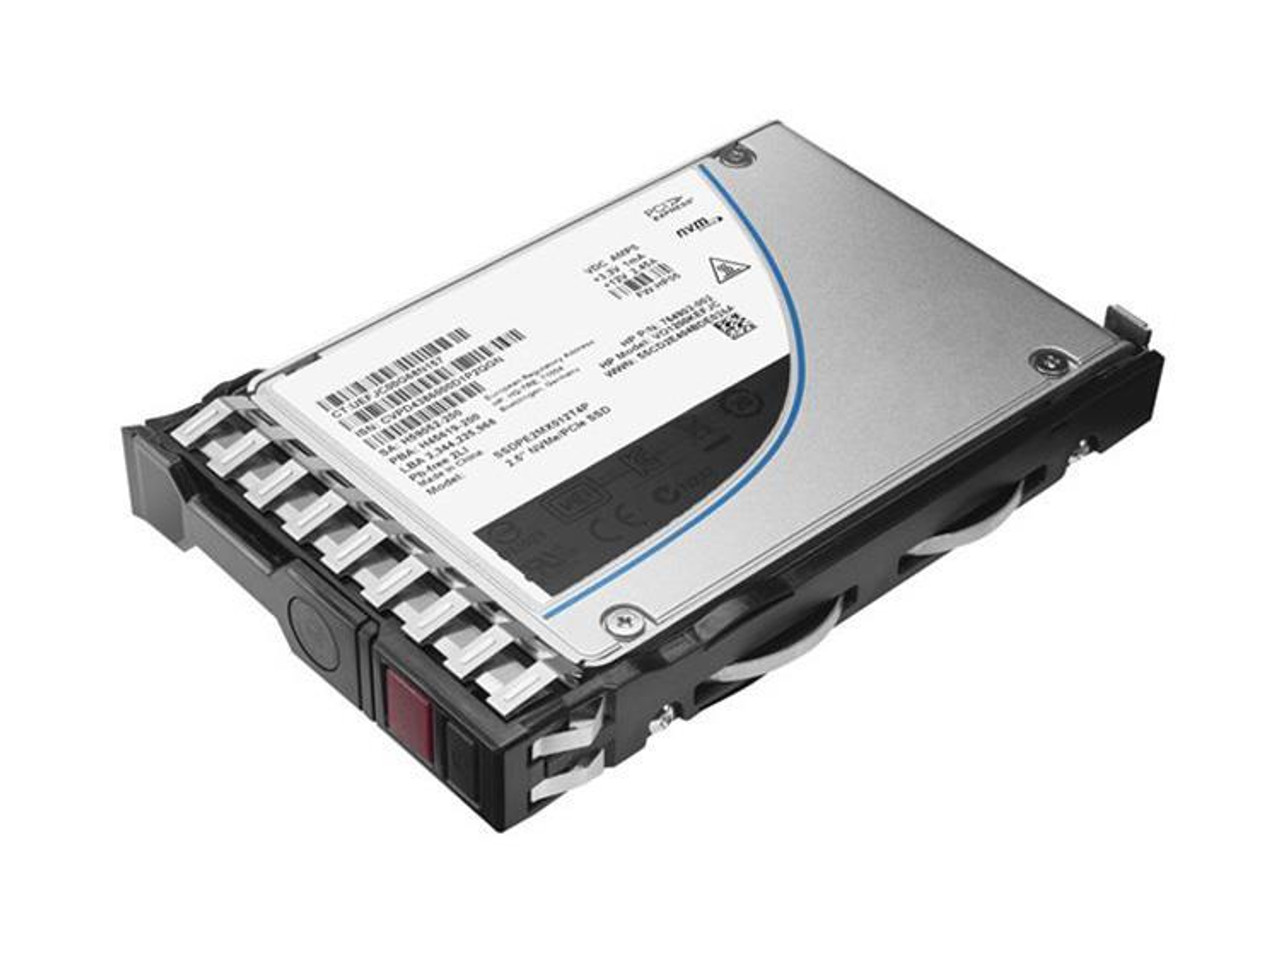 P07930-B21#0D1 HPE 1.92TB SATA 6Gbps Mixed Use 2.5-inch Internal Solid State Drive (SSD) with Smart Carrier